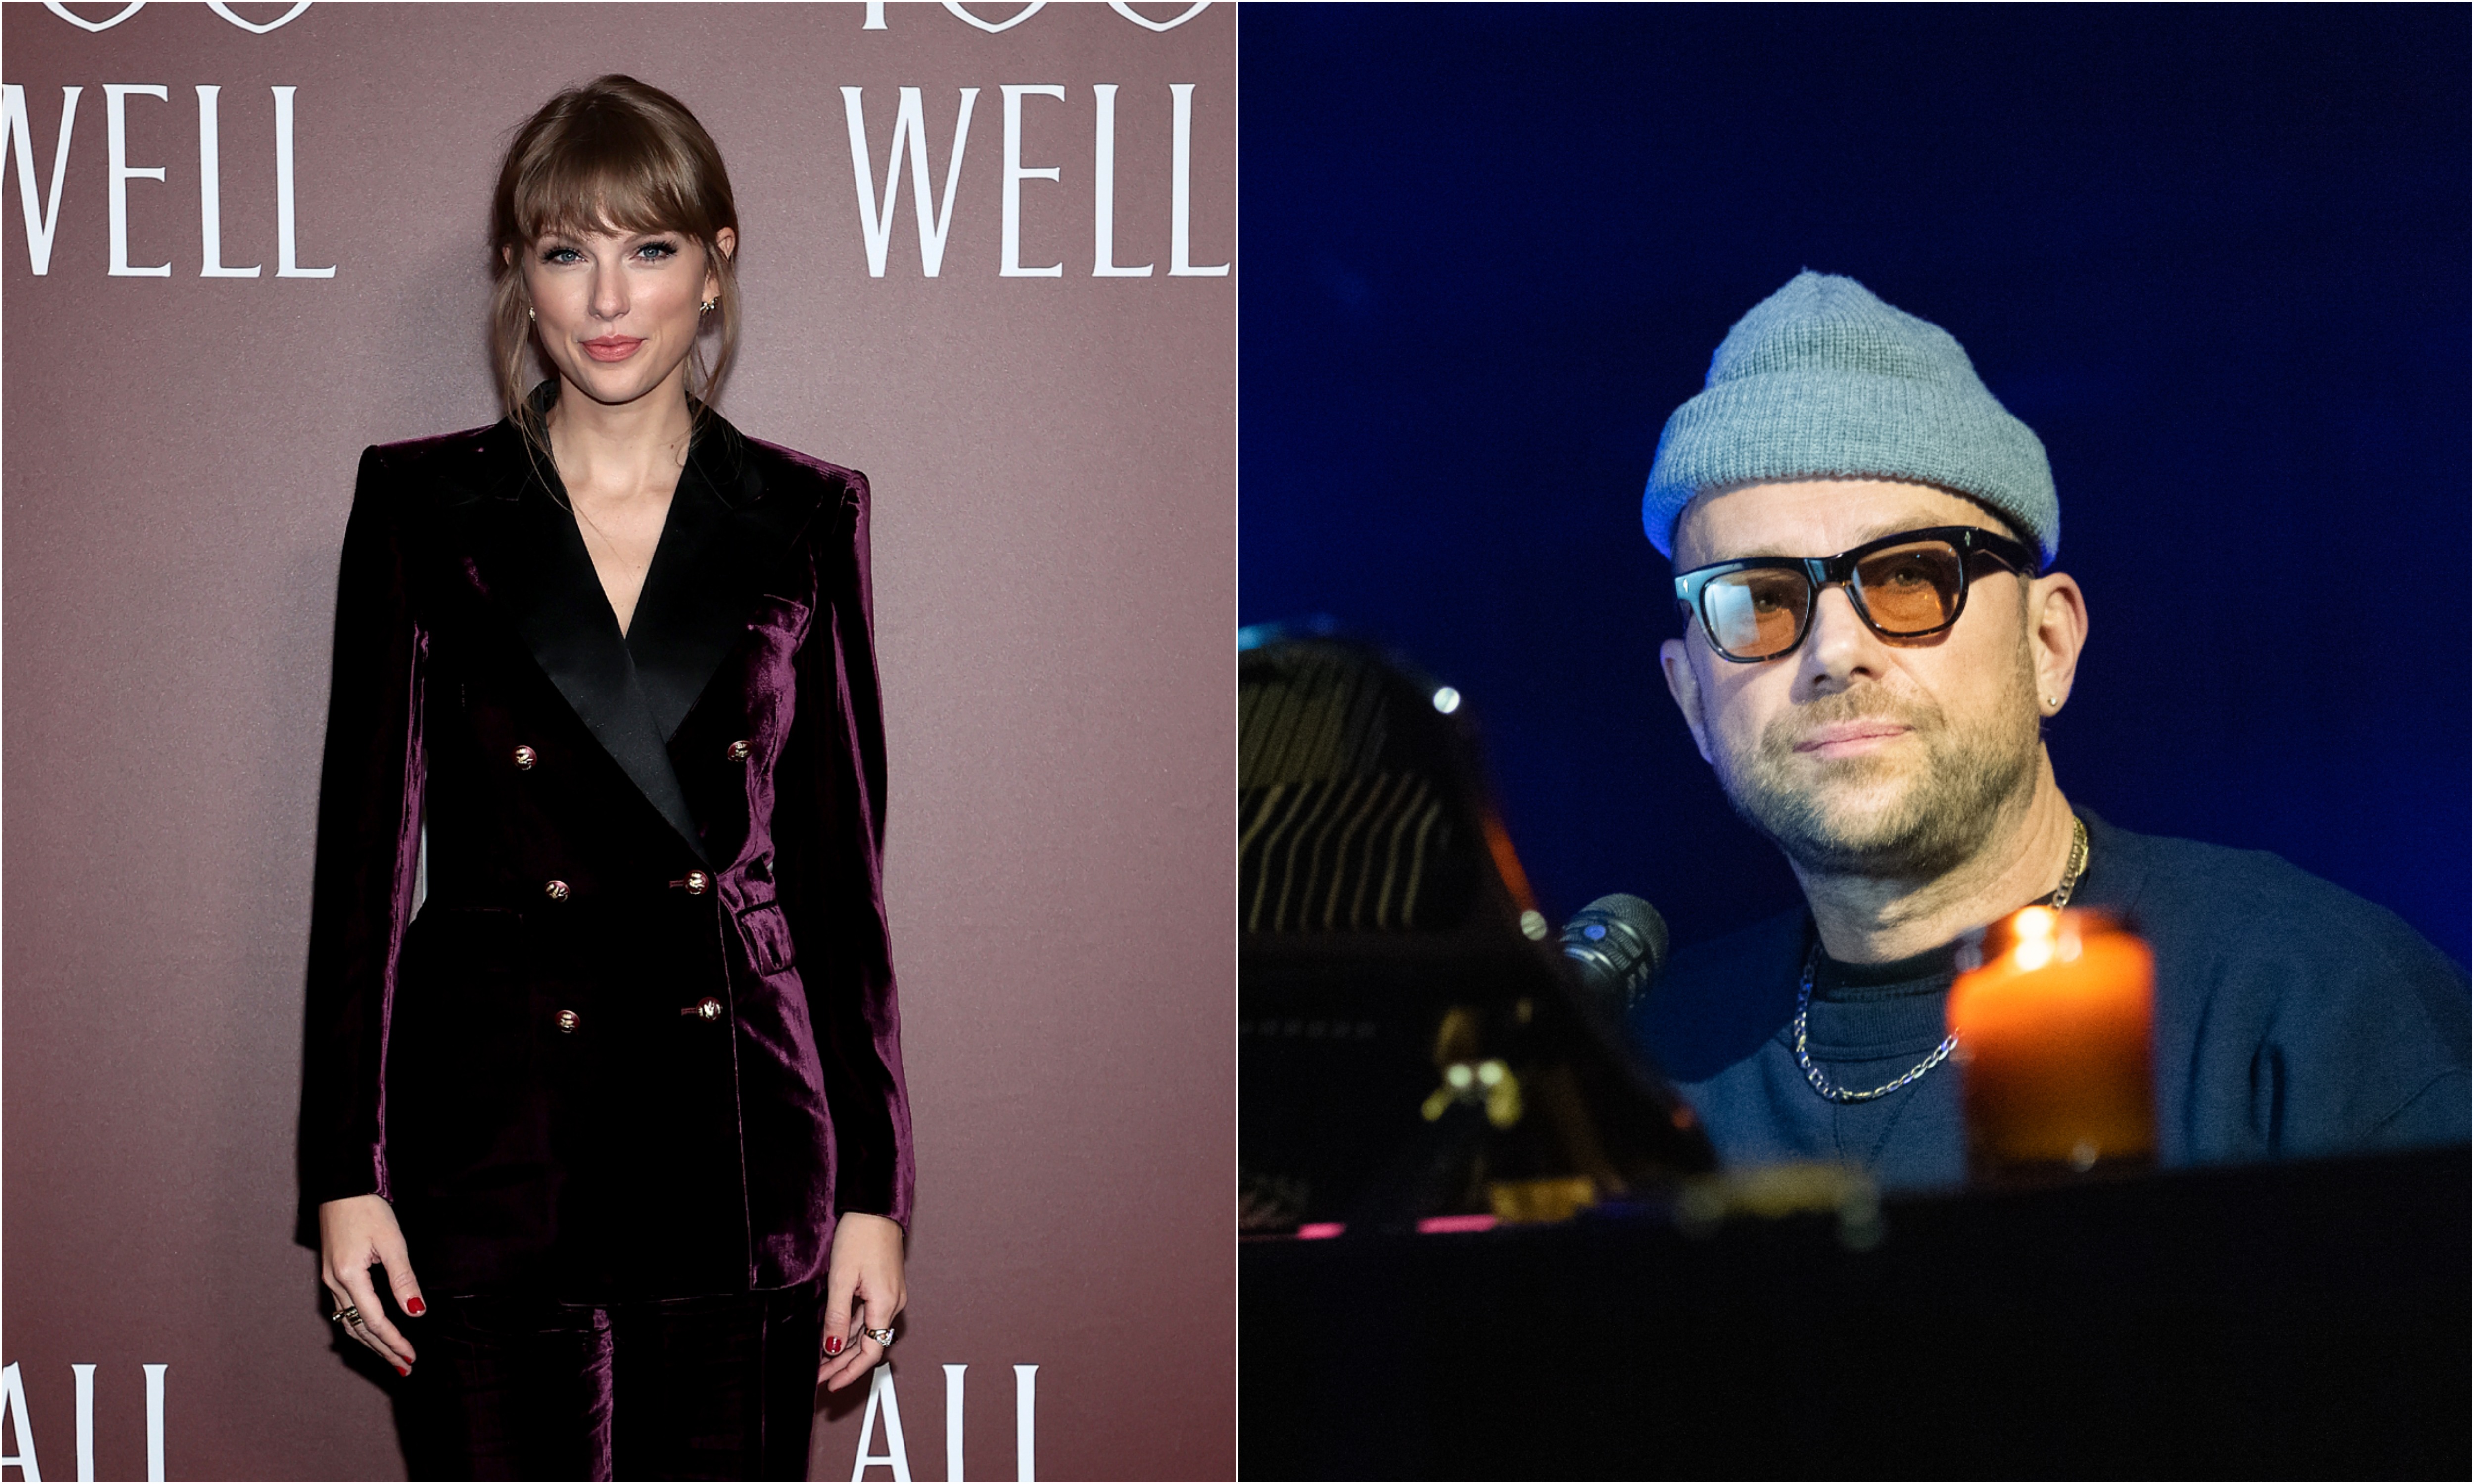 A joined photo of Taylor Swift and Damon Albarn